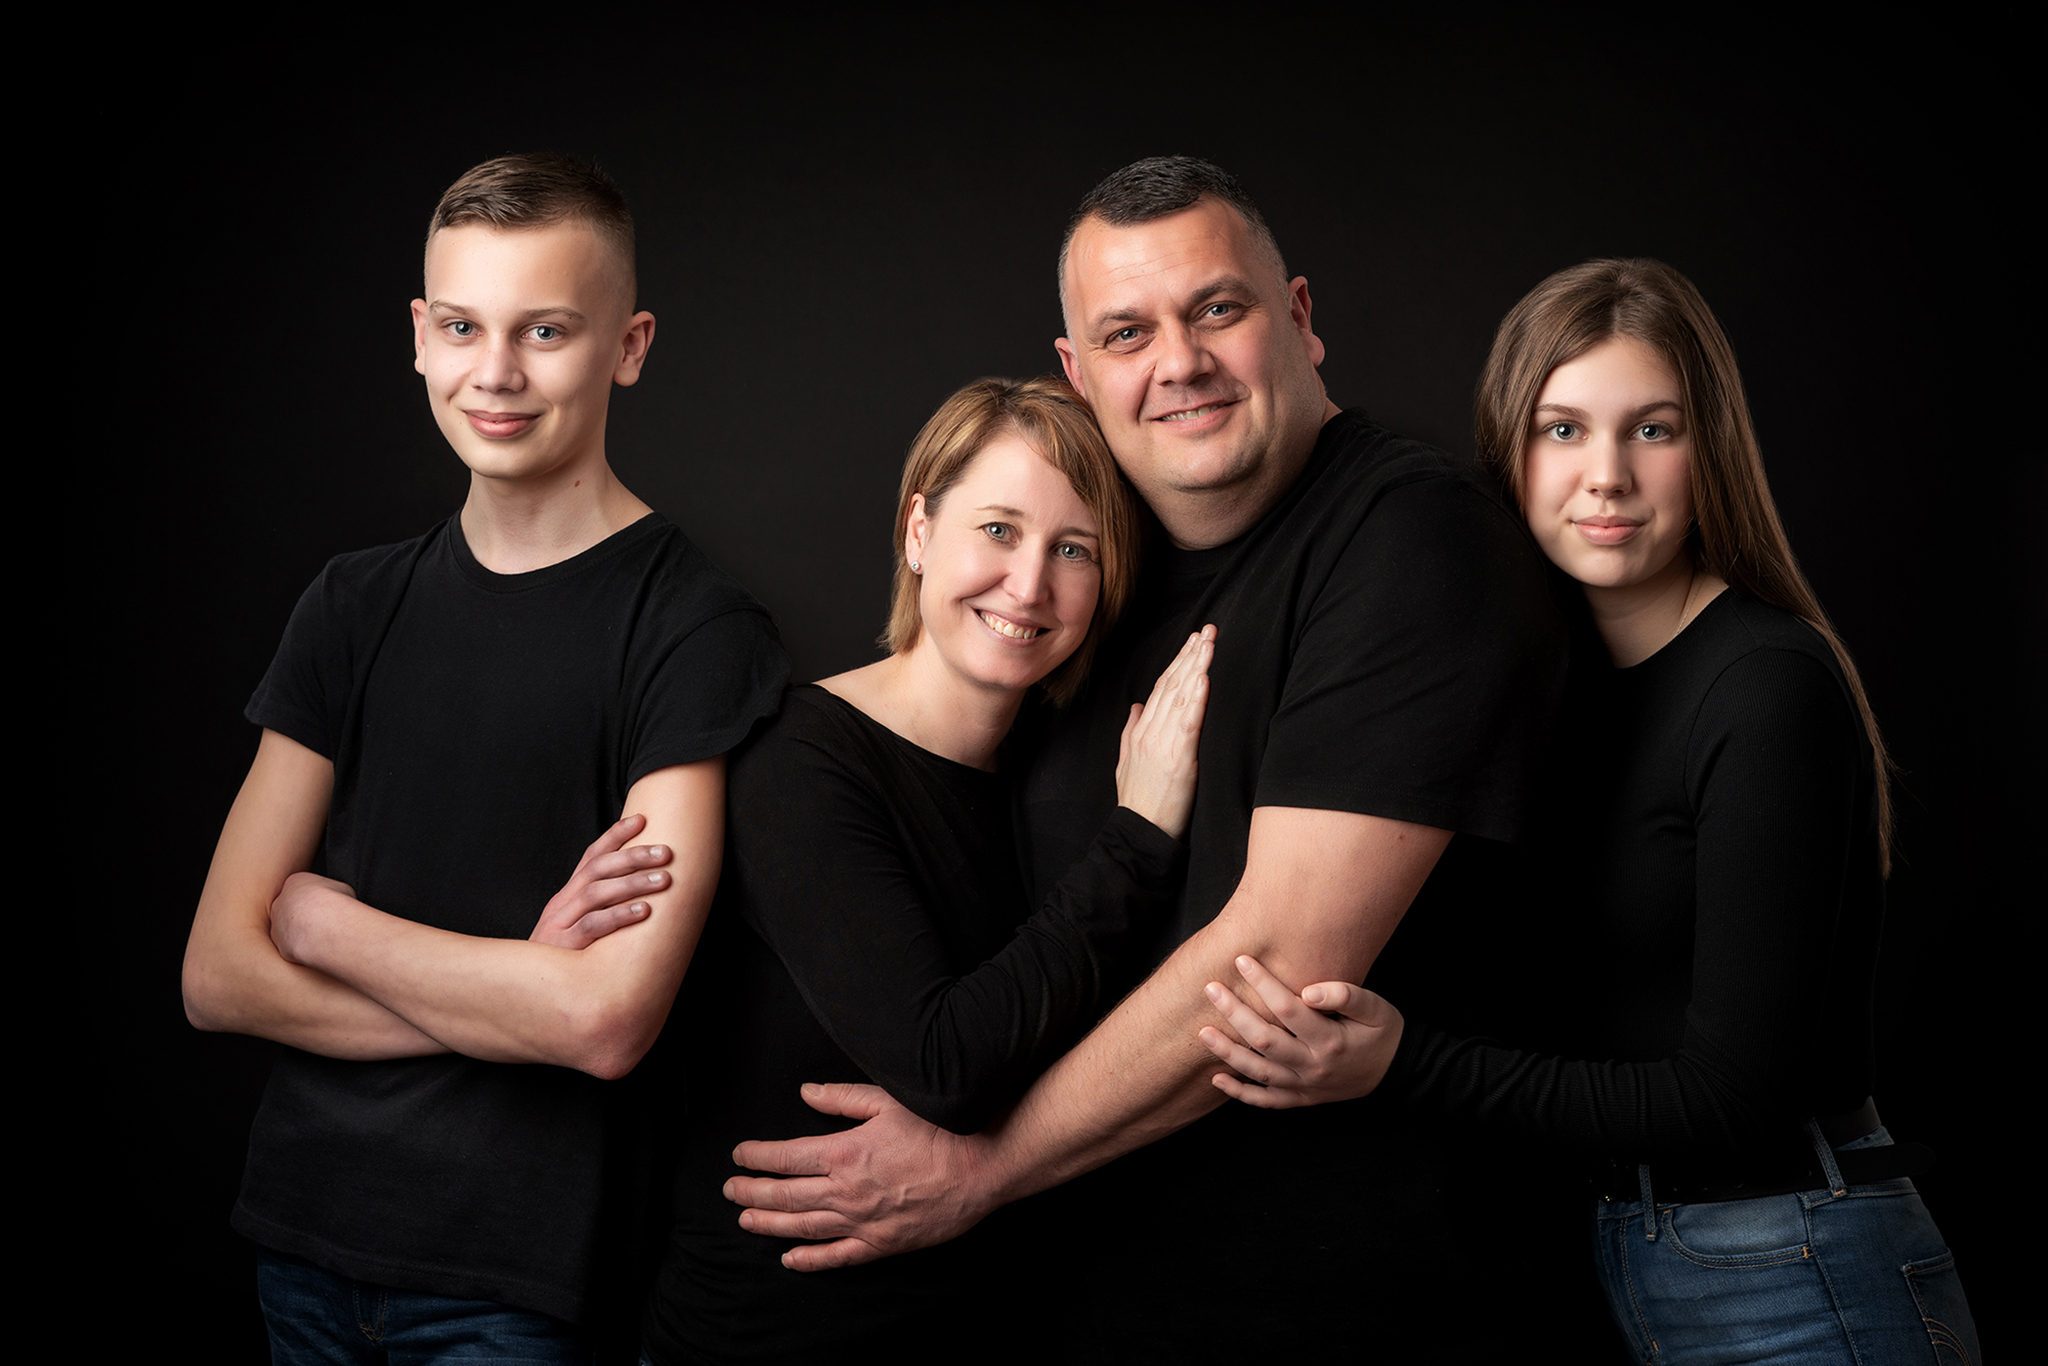 family photograph parents with teenagers studio portrait by Family photographer Lancashire